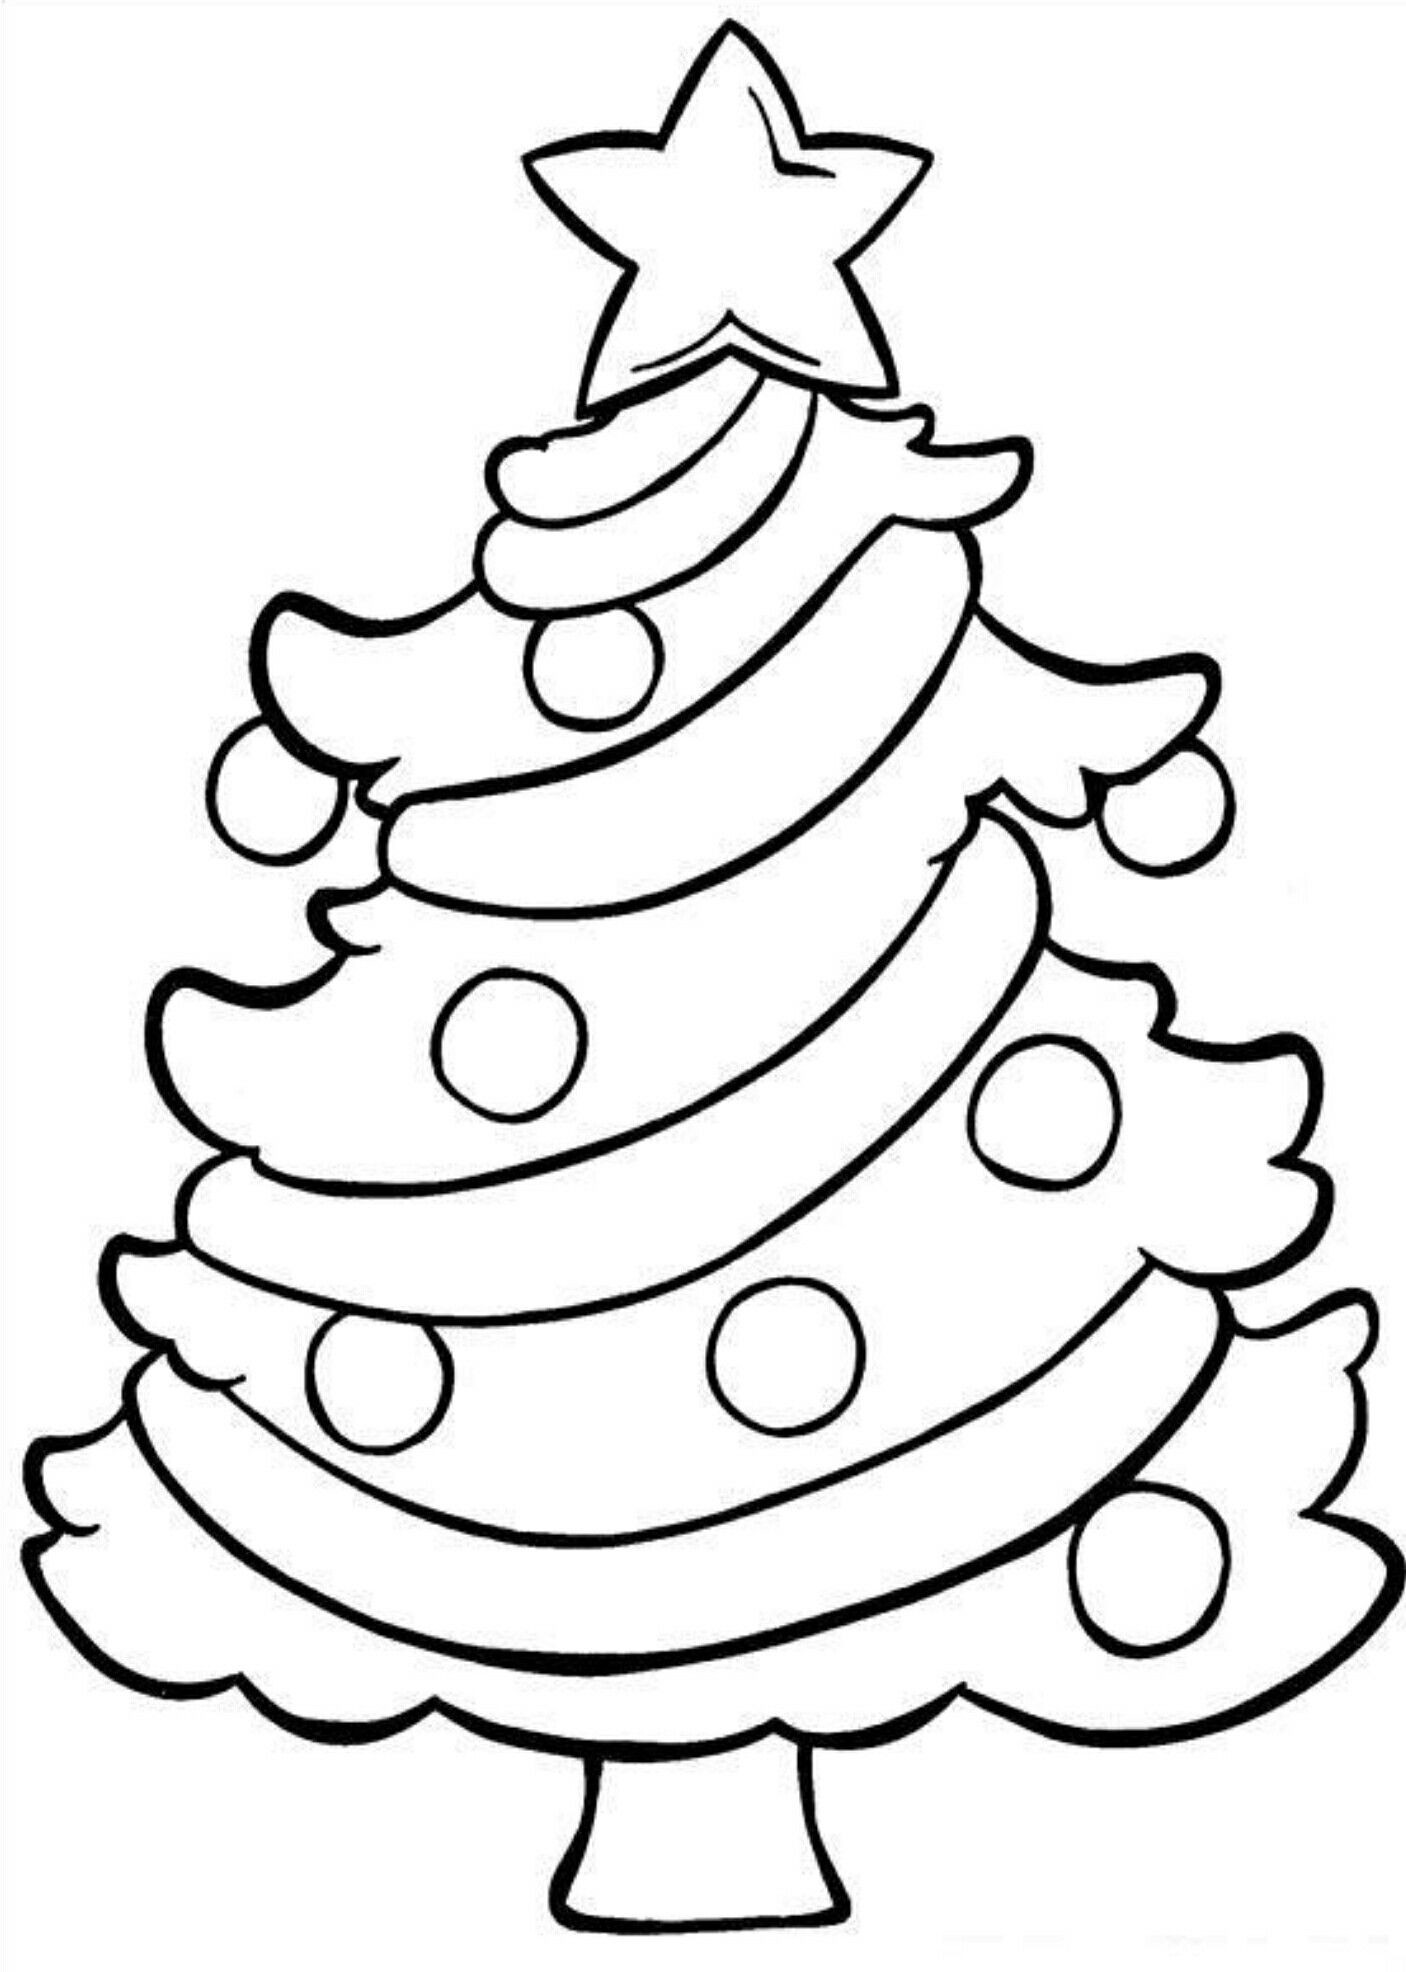 Christmas Tree Coloring Pages For Kids
 Pin by Esther on Pre K stuff